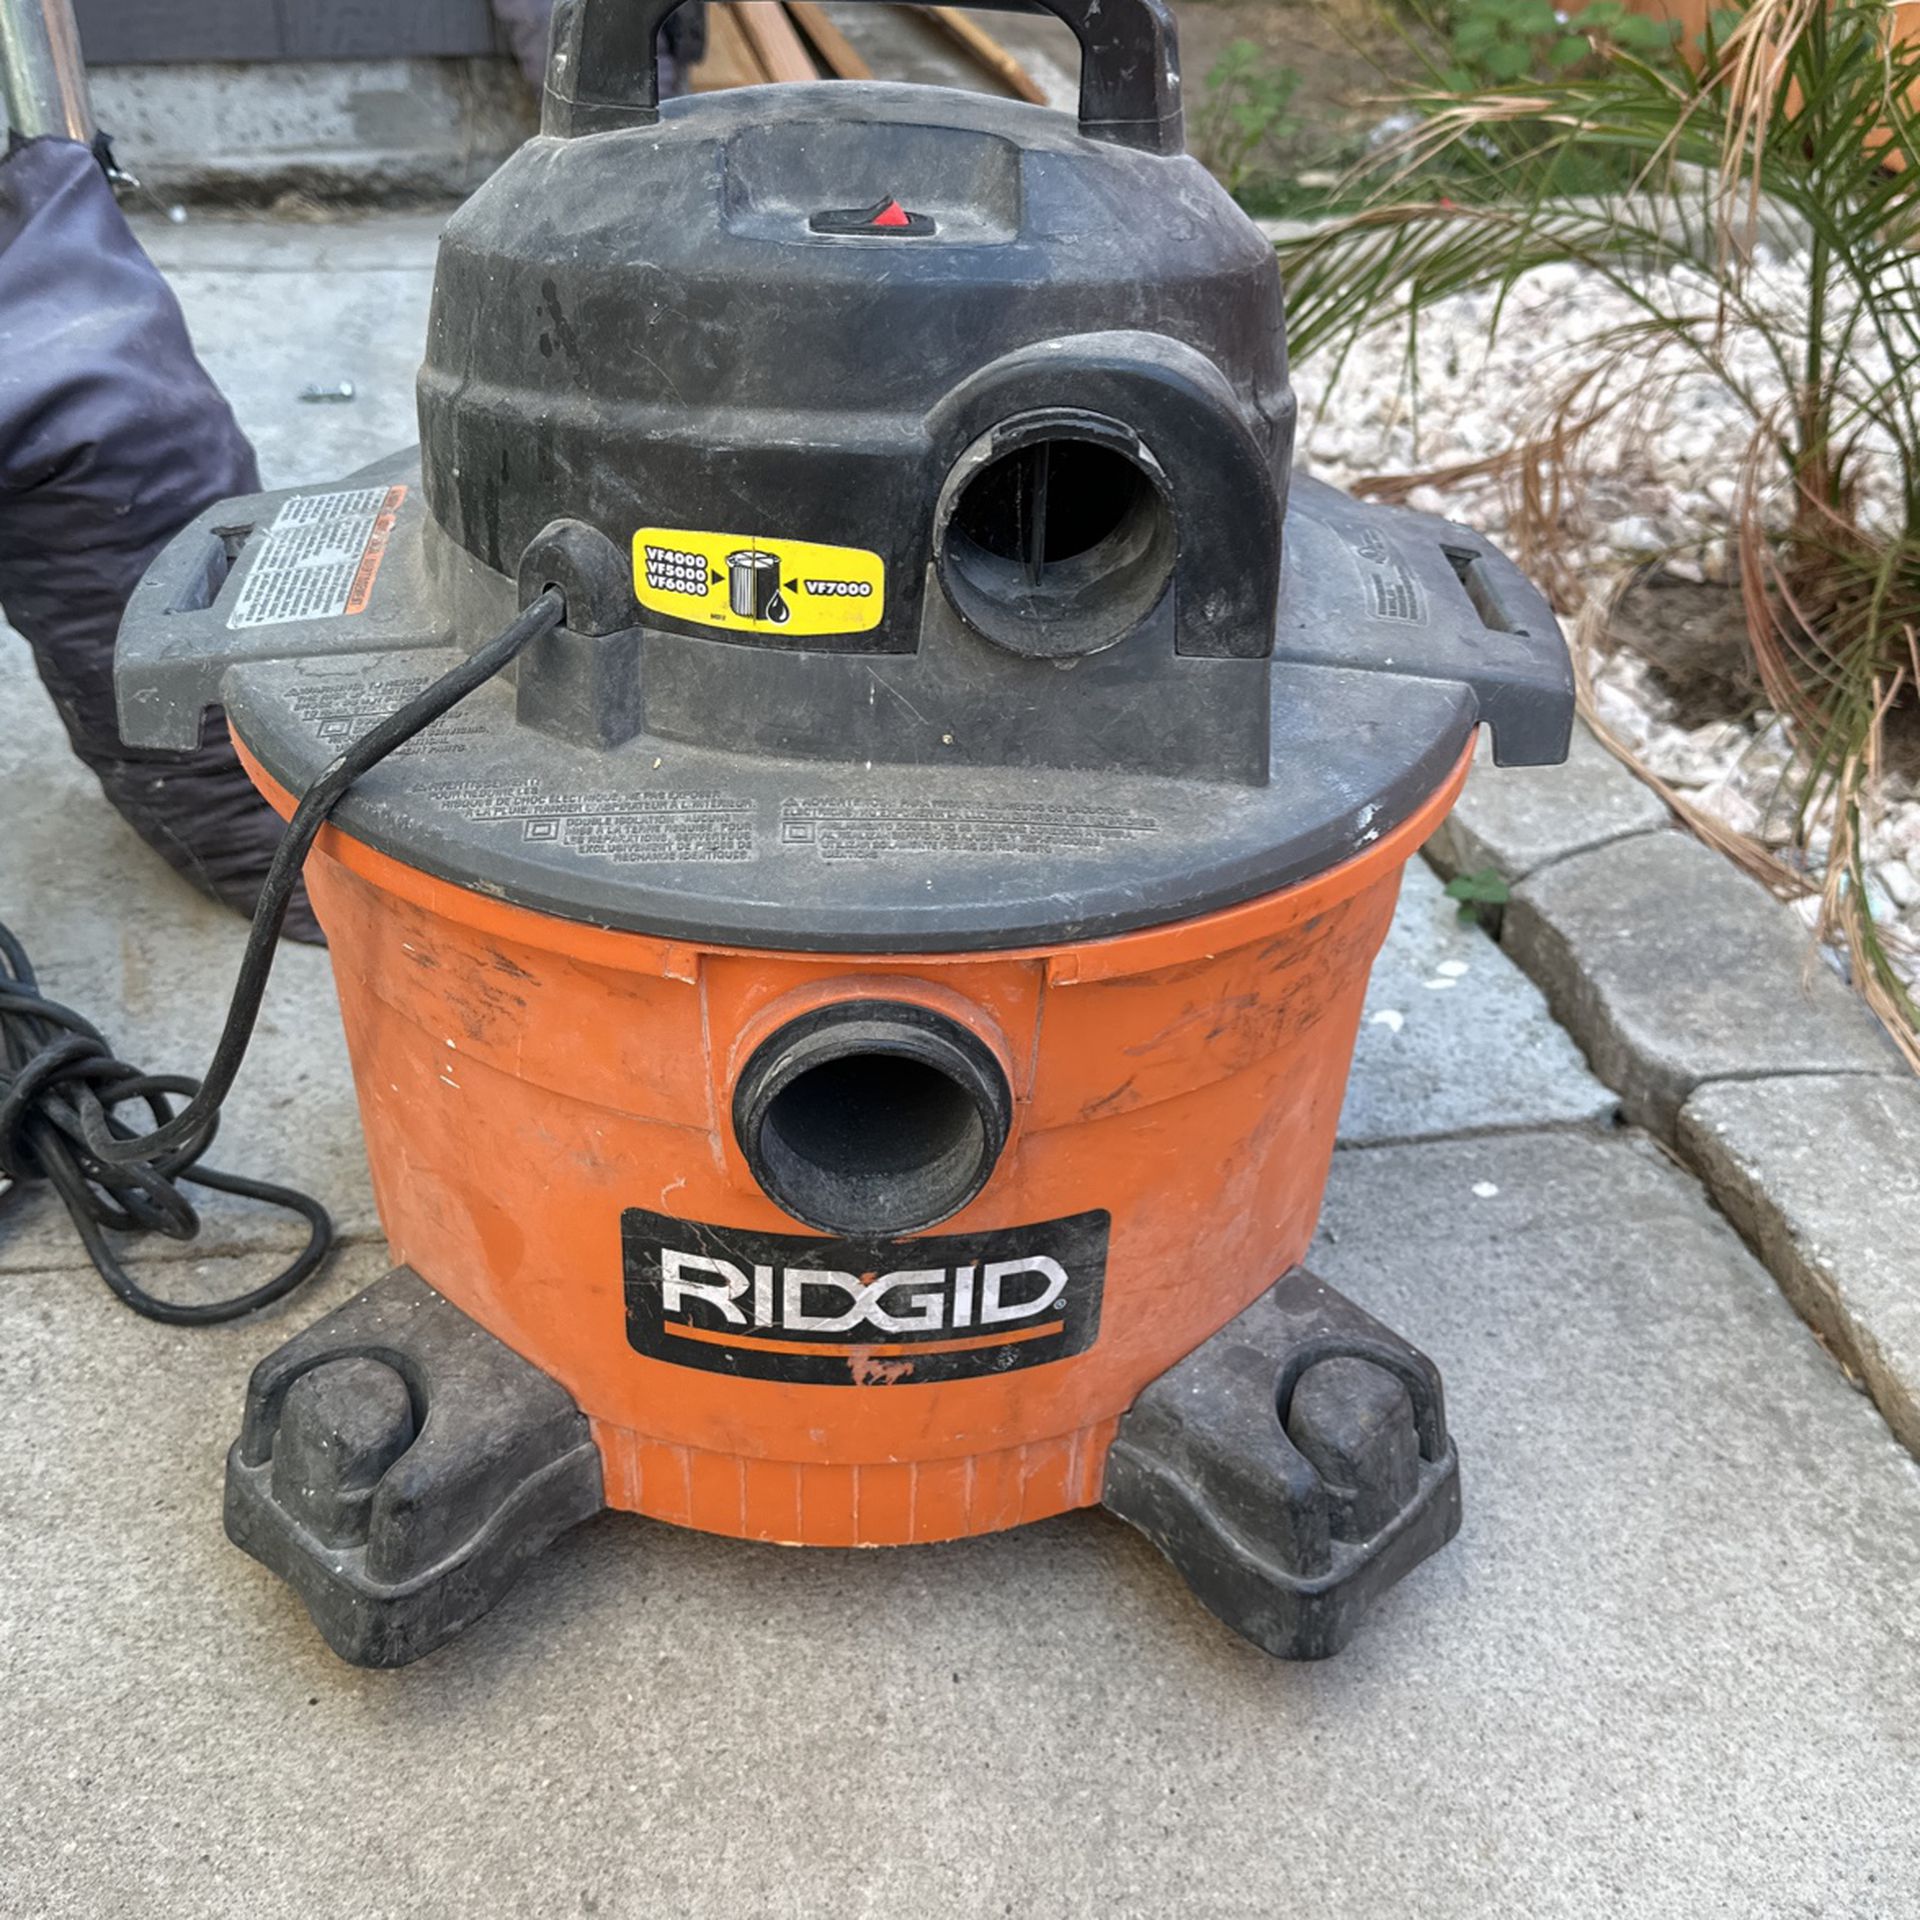 Ridgid Wet/Dry Vac for Sale in Los Angeles, CA - OfferUp